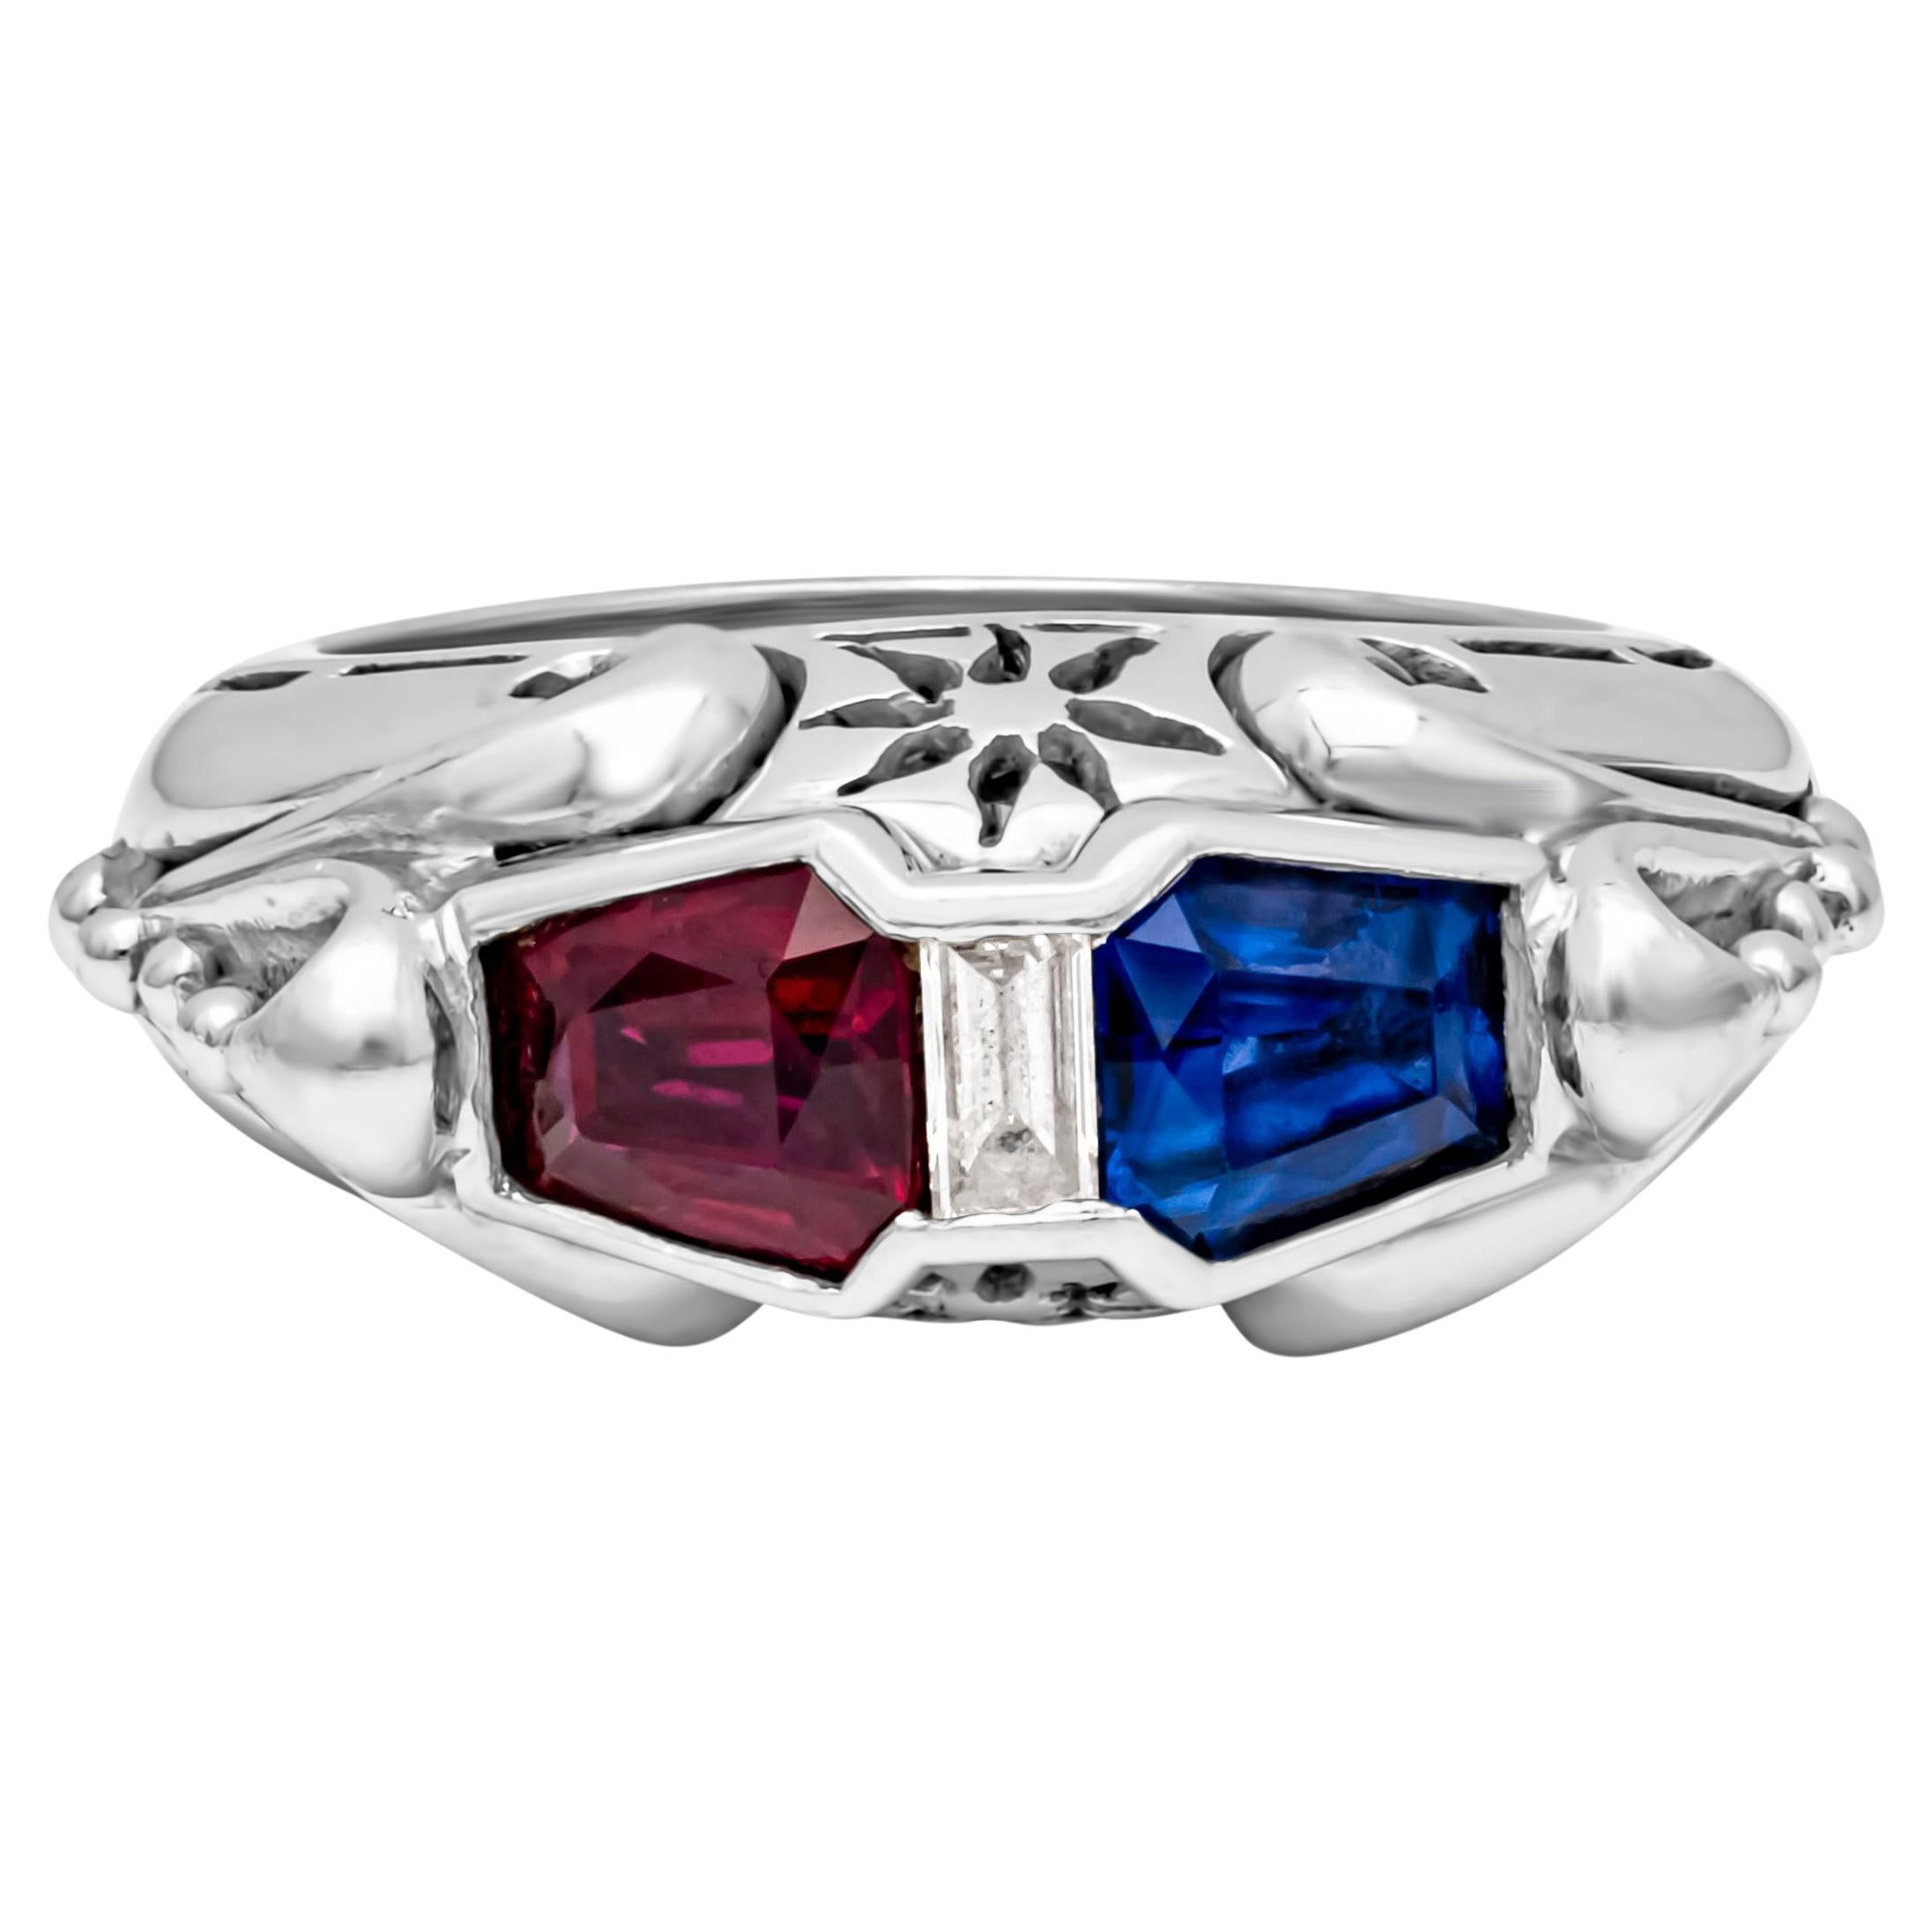 GIA Certified 1.6 Carats Total Trapezoid Cut Ruby & Sri Lanka Blue Sapphire Ring For Sale